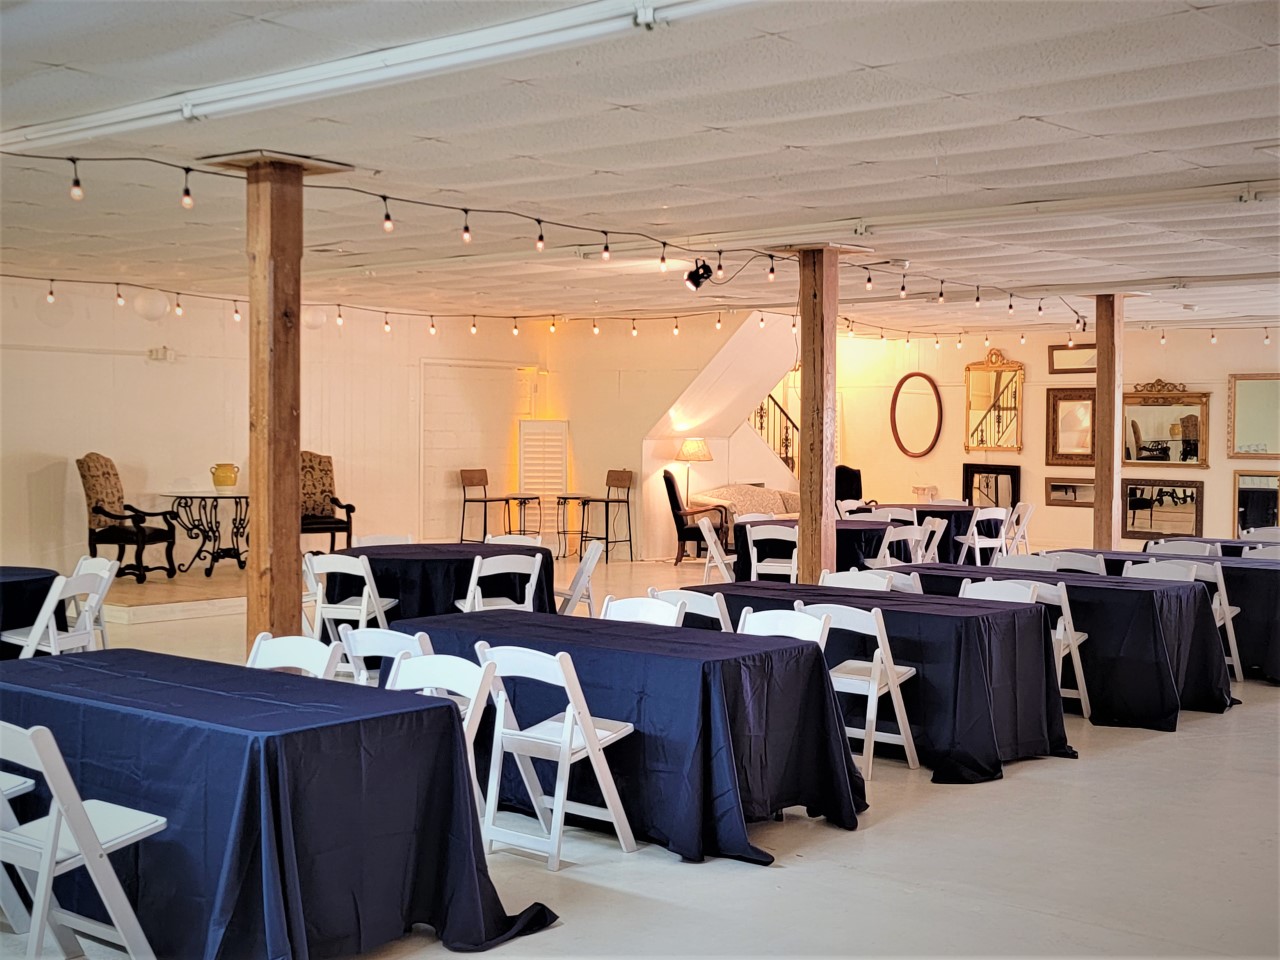 The Eclectic Ballroom with blue table cloth